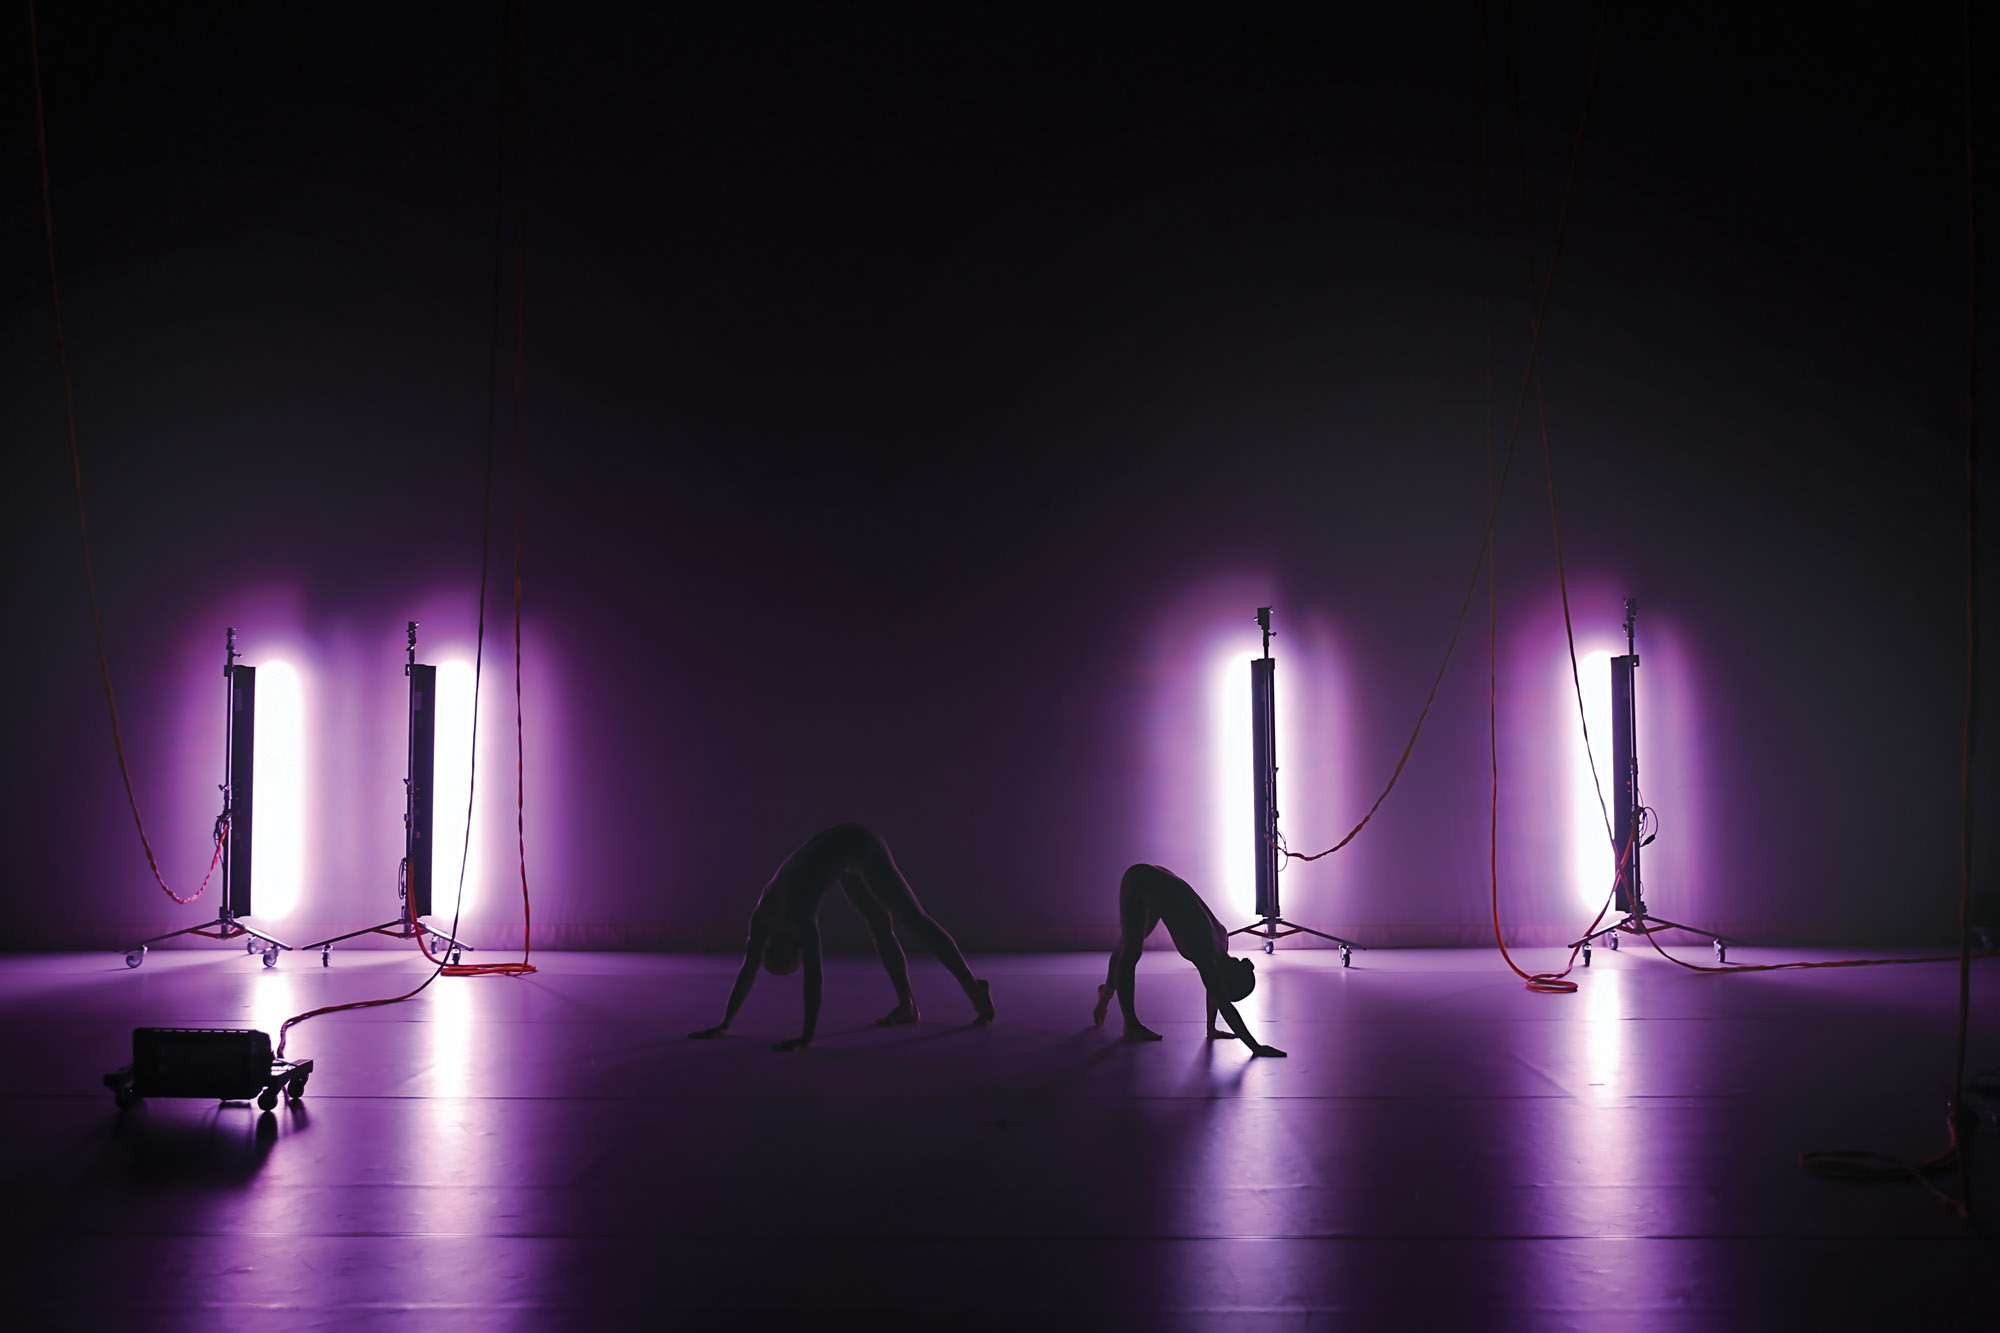 Two dancers in bent positions washed in purple light 